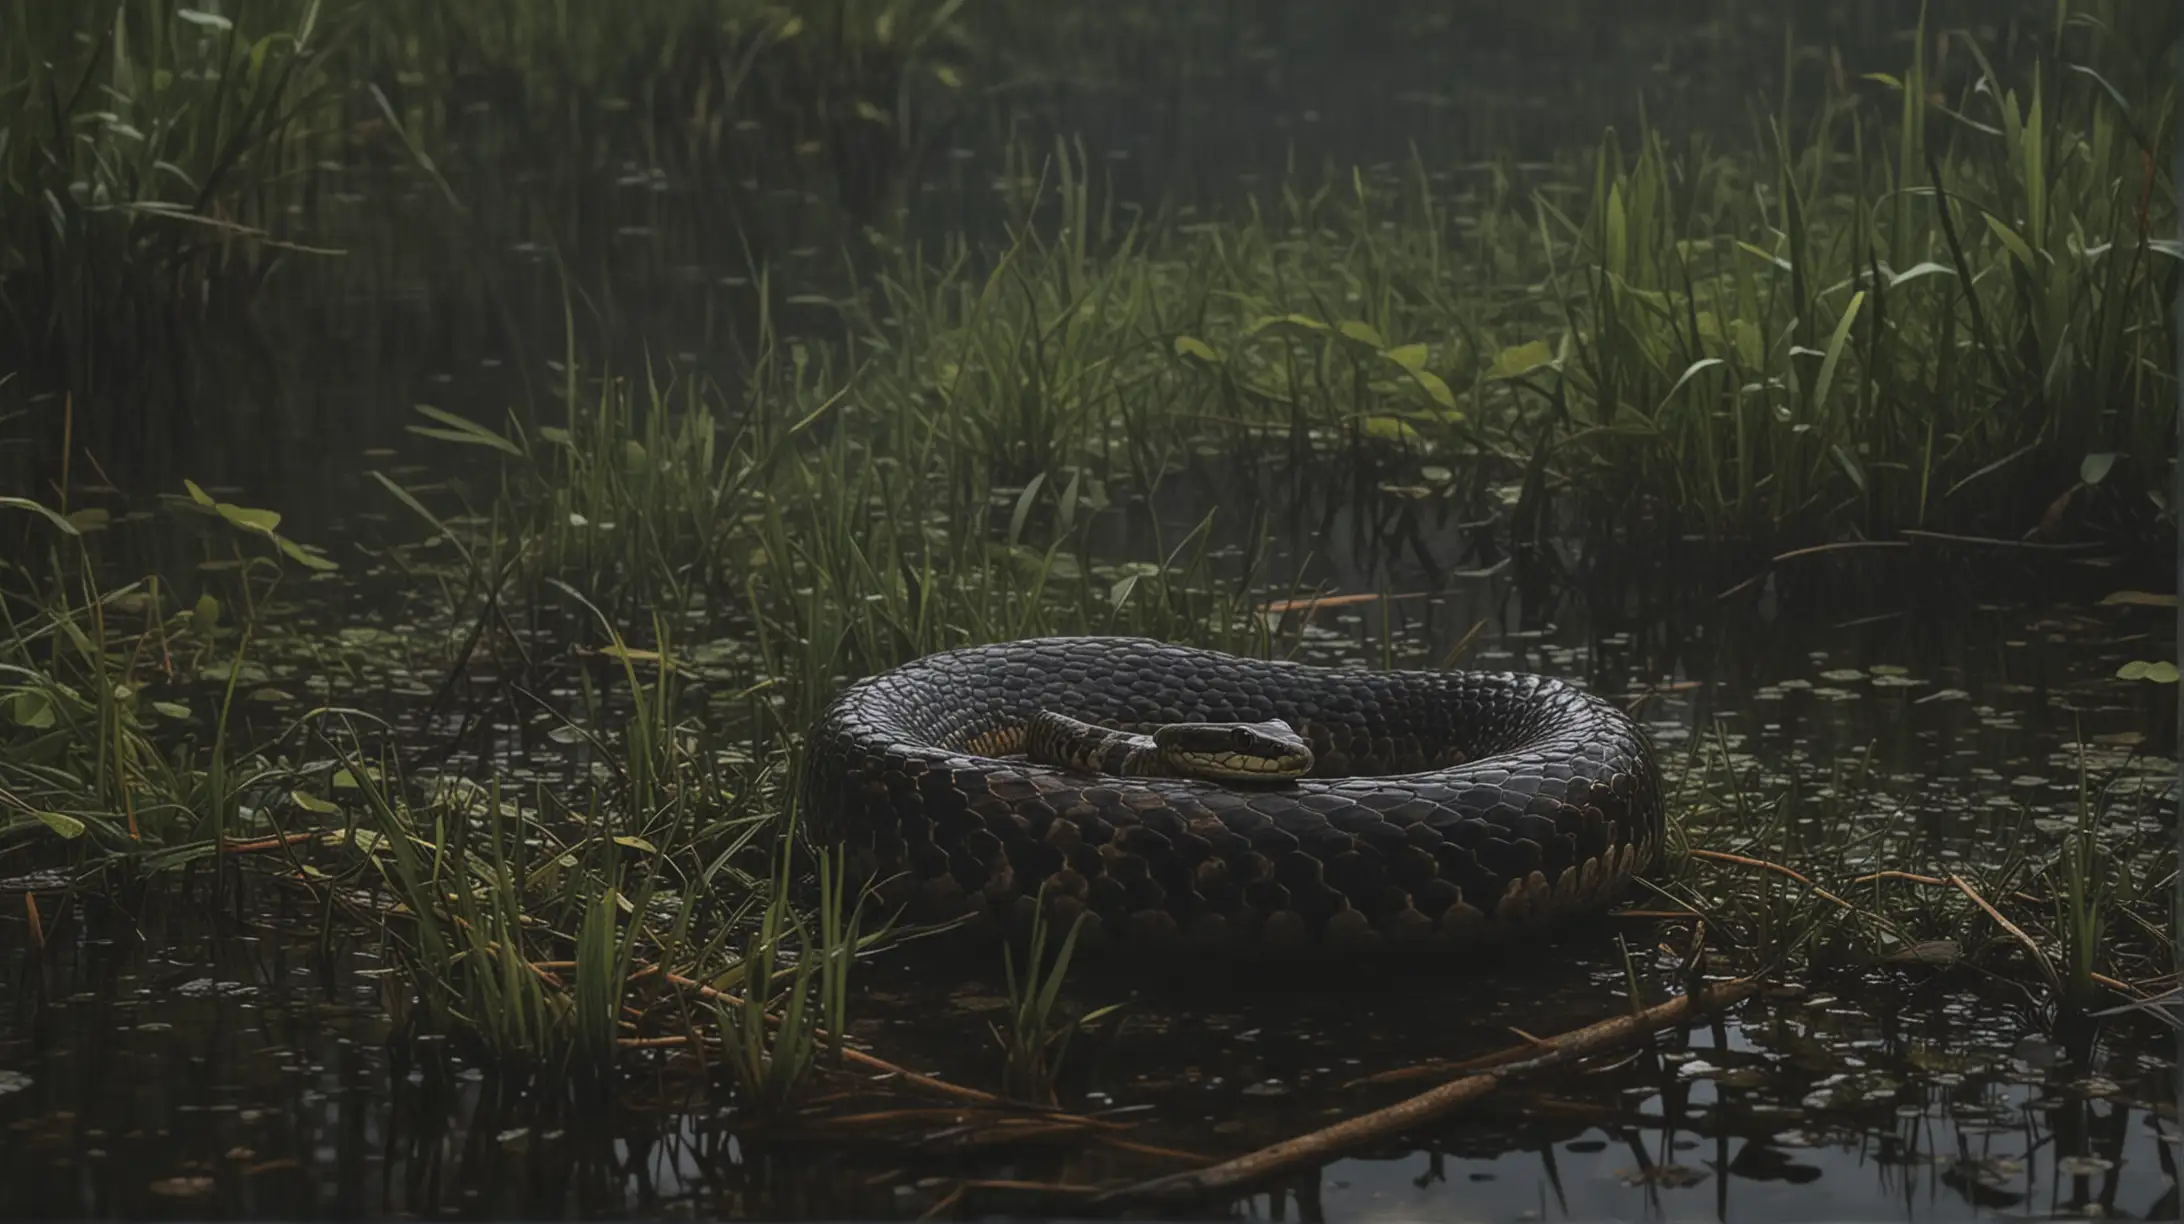 Generate an image of a water moccasin on the banks of a dark, murky swamp.
